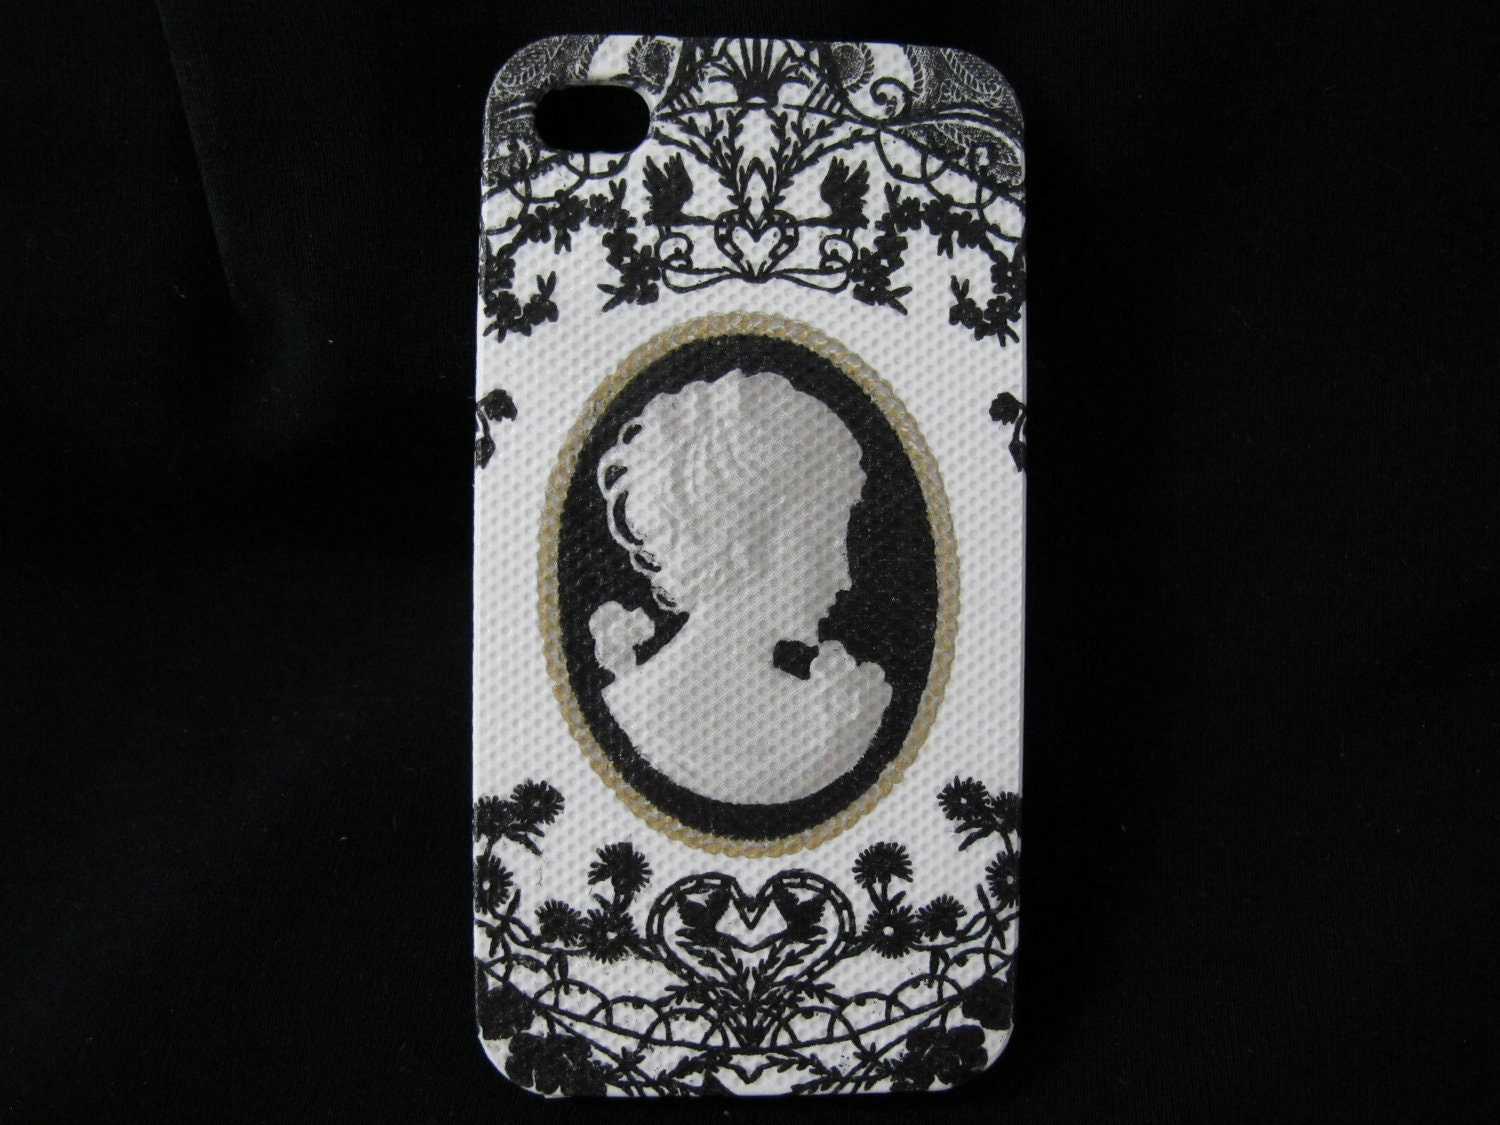  iphone 4s covers 